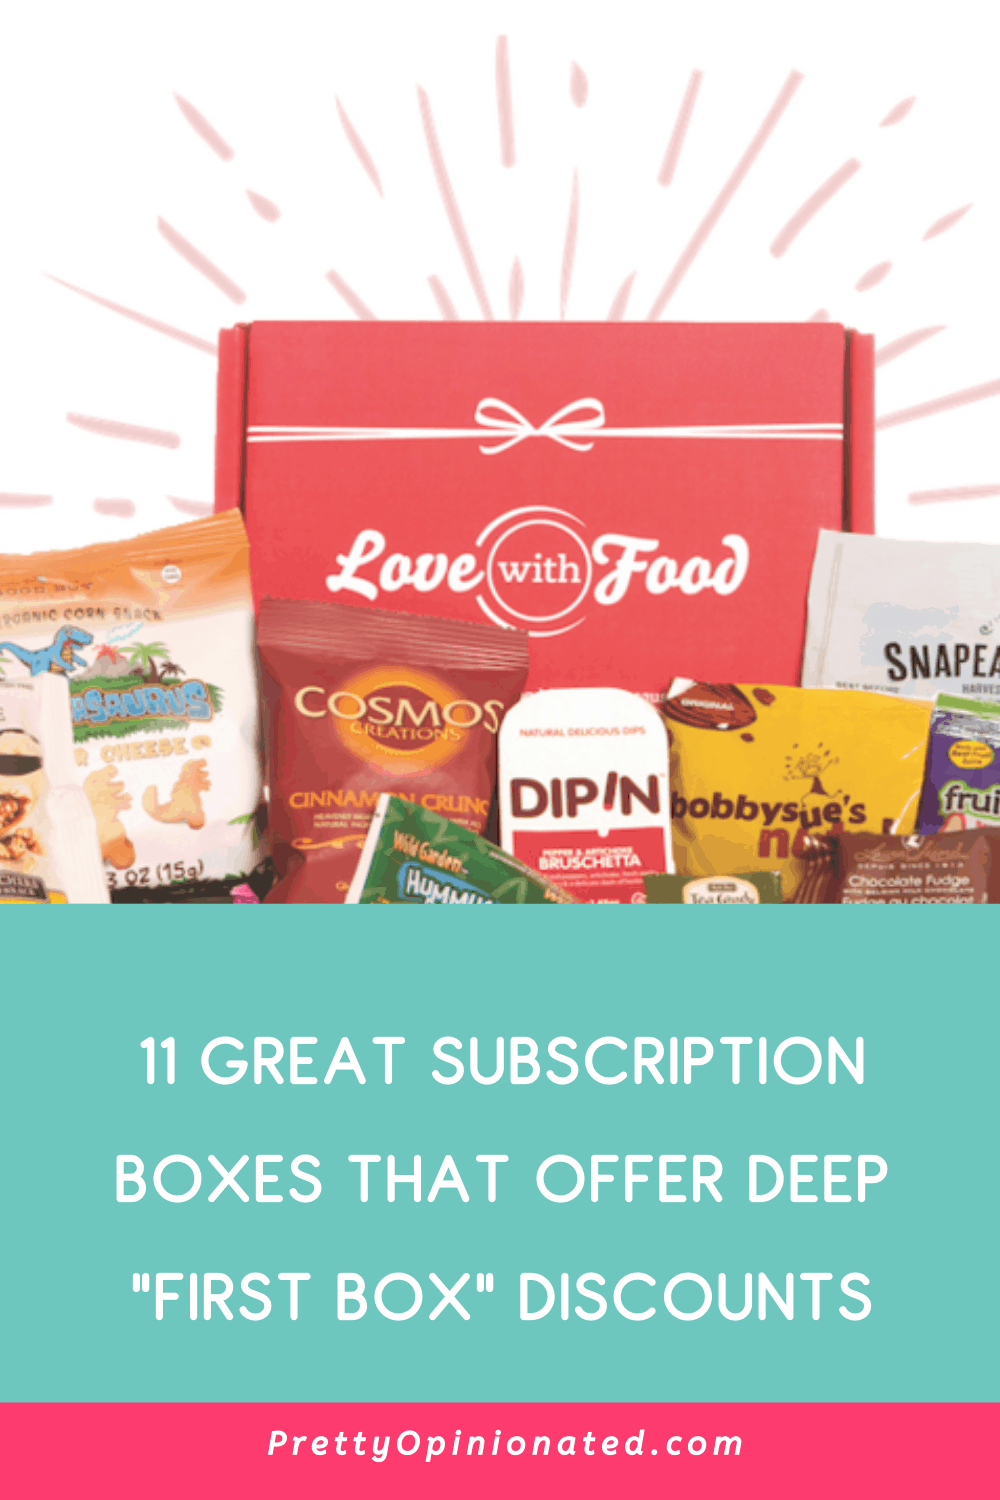 Check out 11 subscription boxes that offer deep discounts on your first box so you can actually make sure you like it before committing to full price.